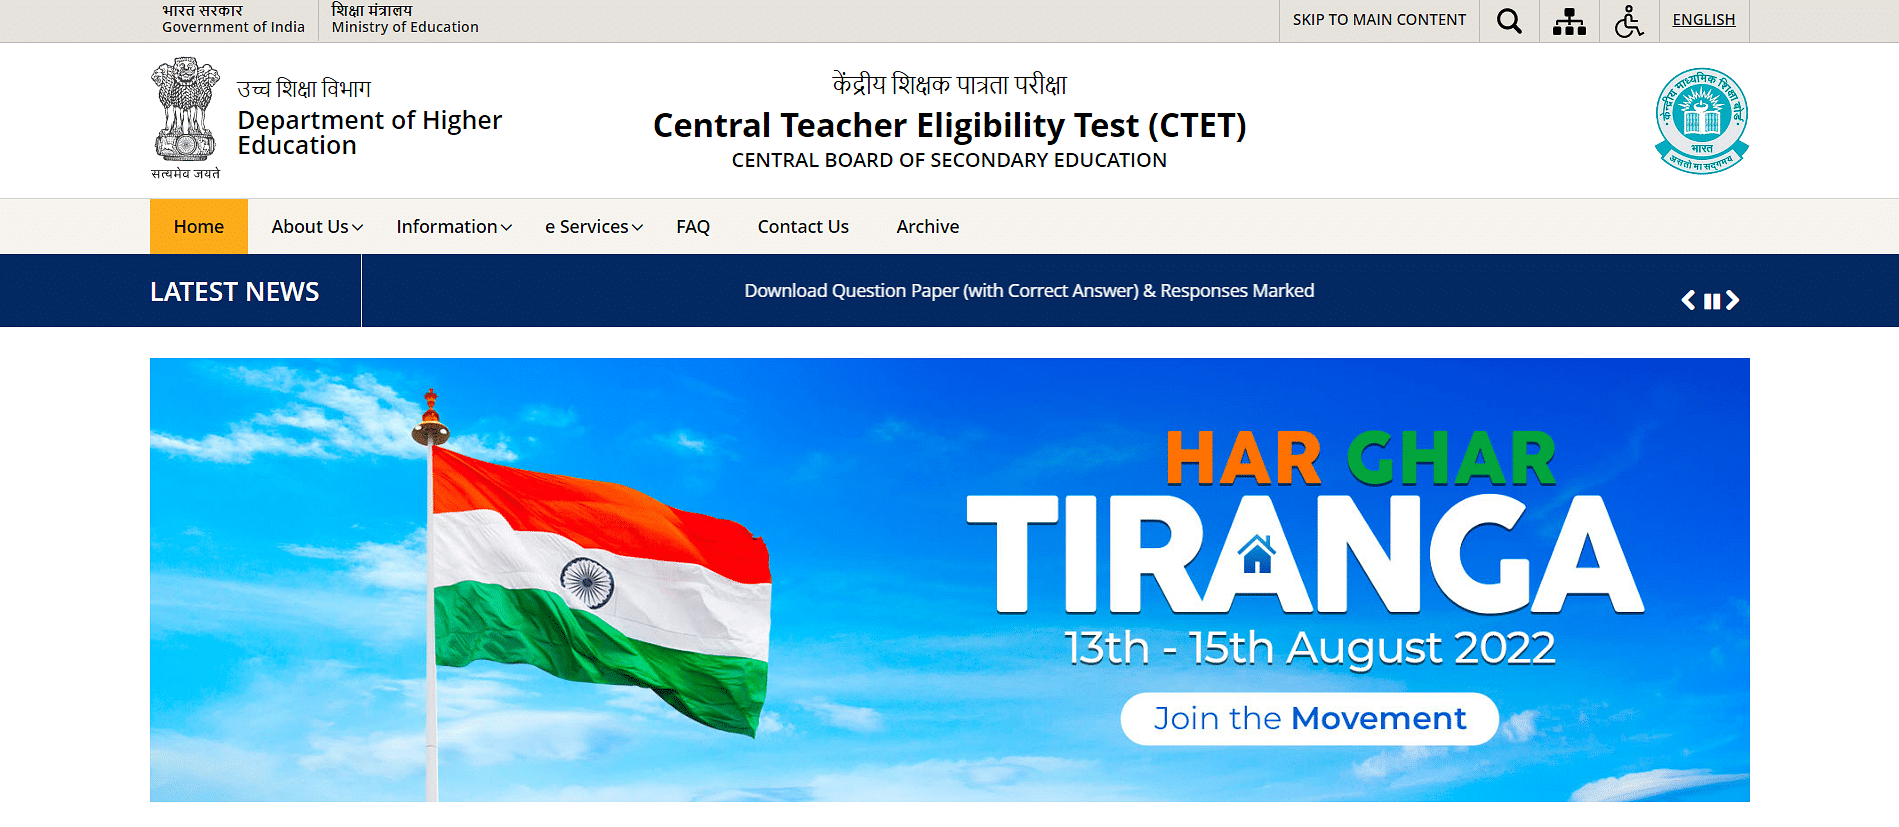 Ctet Exam Dates 2022 Soon Check Details Here